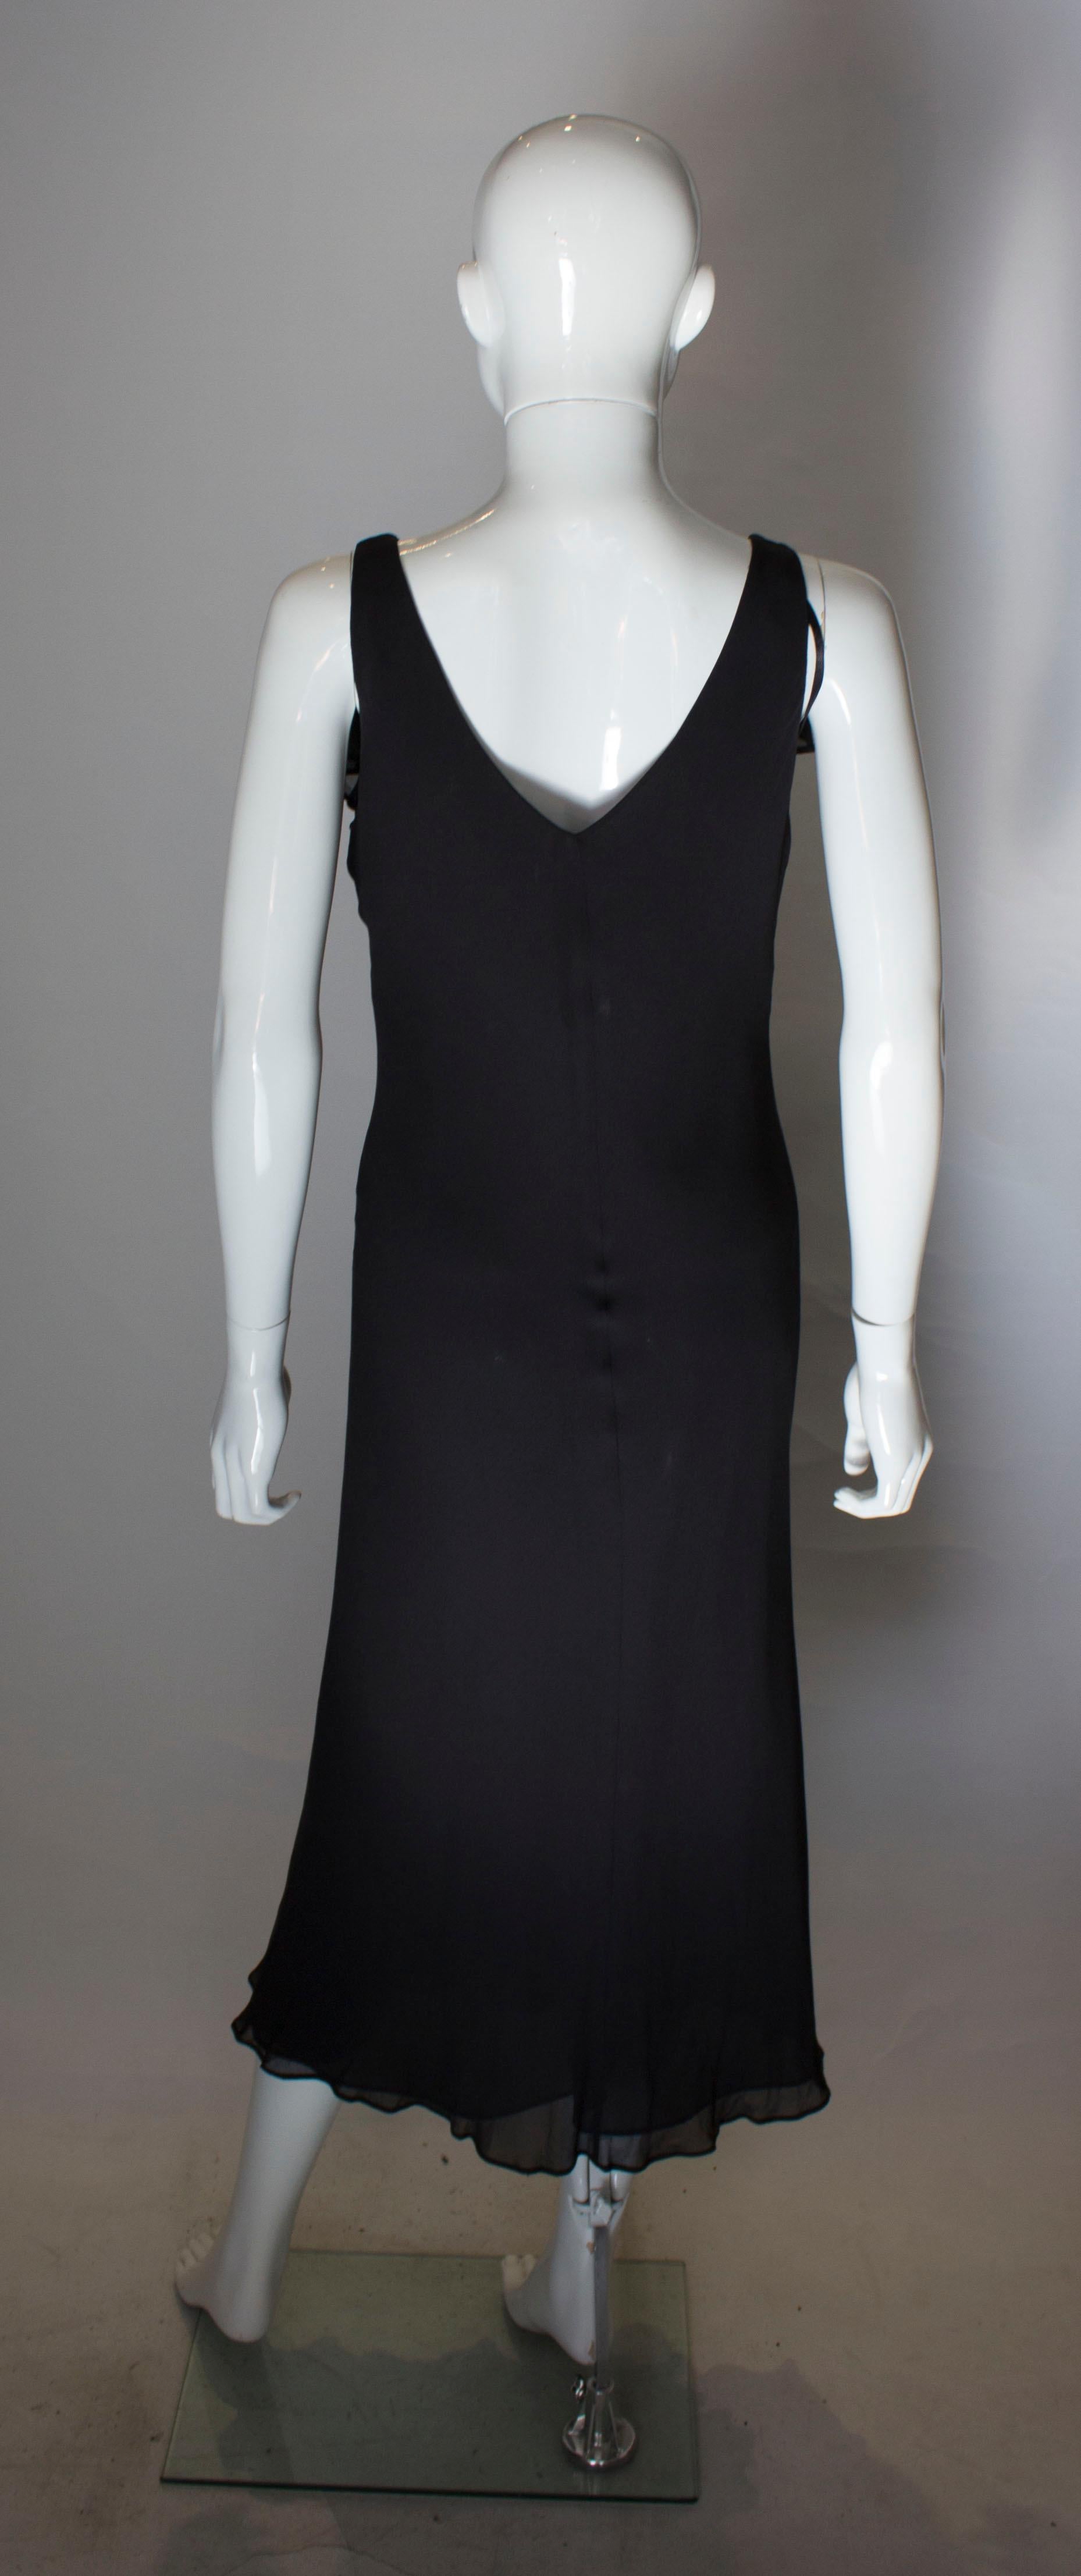 Vintage Slip Dress with Ruffle at Neckline For Sale 2